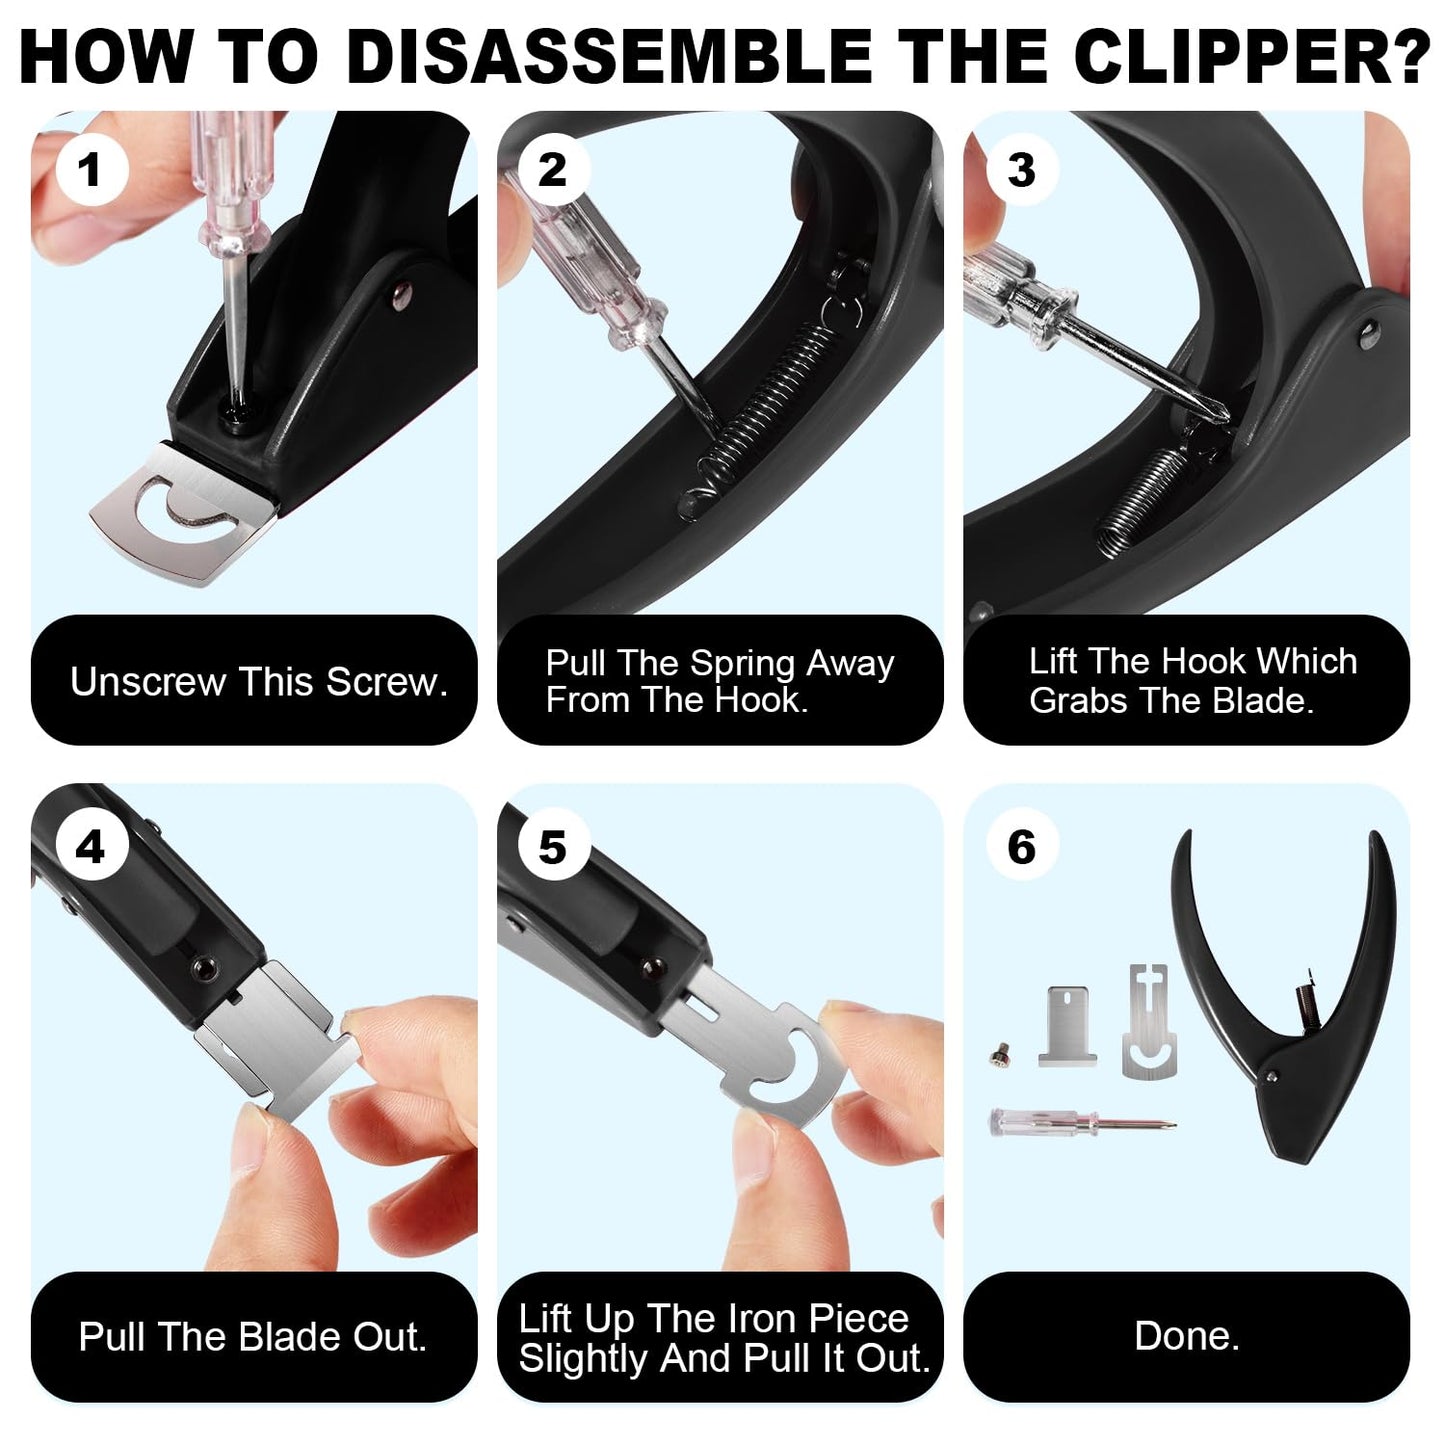 Black Adjustable Nail Clippers with Magnets Sizers for Acrylic Nails, Artificial Fake Nail False Nail Tip Cutter Trimmer Manicure Pedicure Sharp Blade Clip Tool for Salon Home Art Beauty